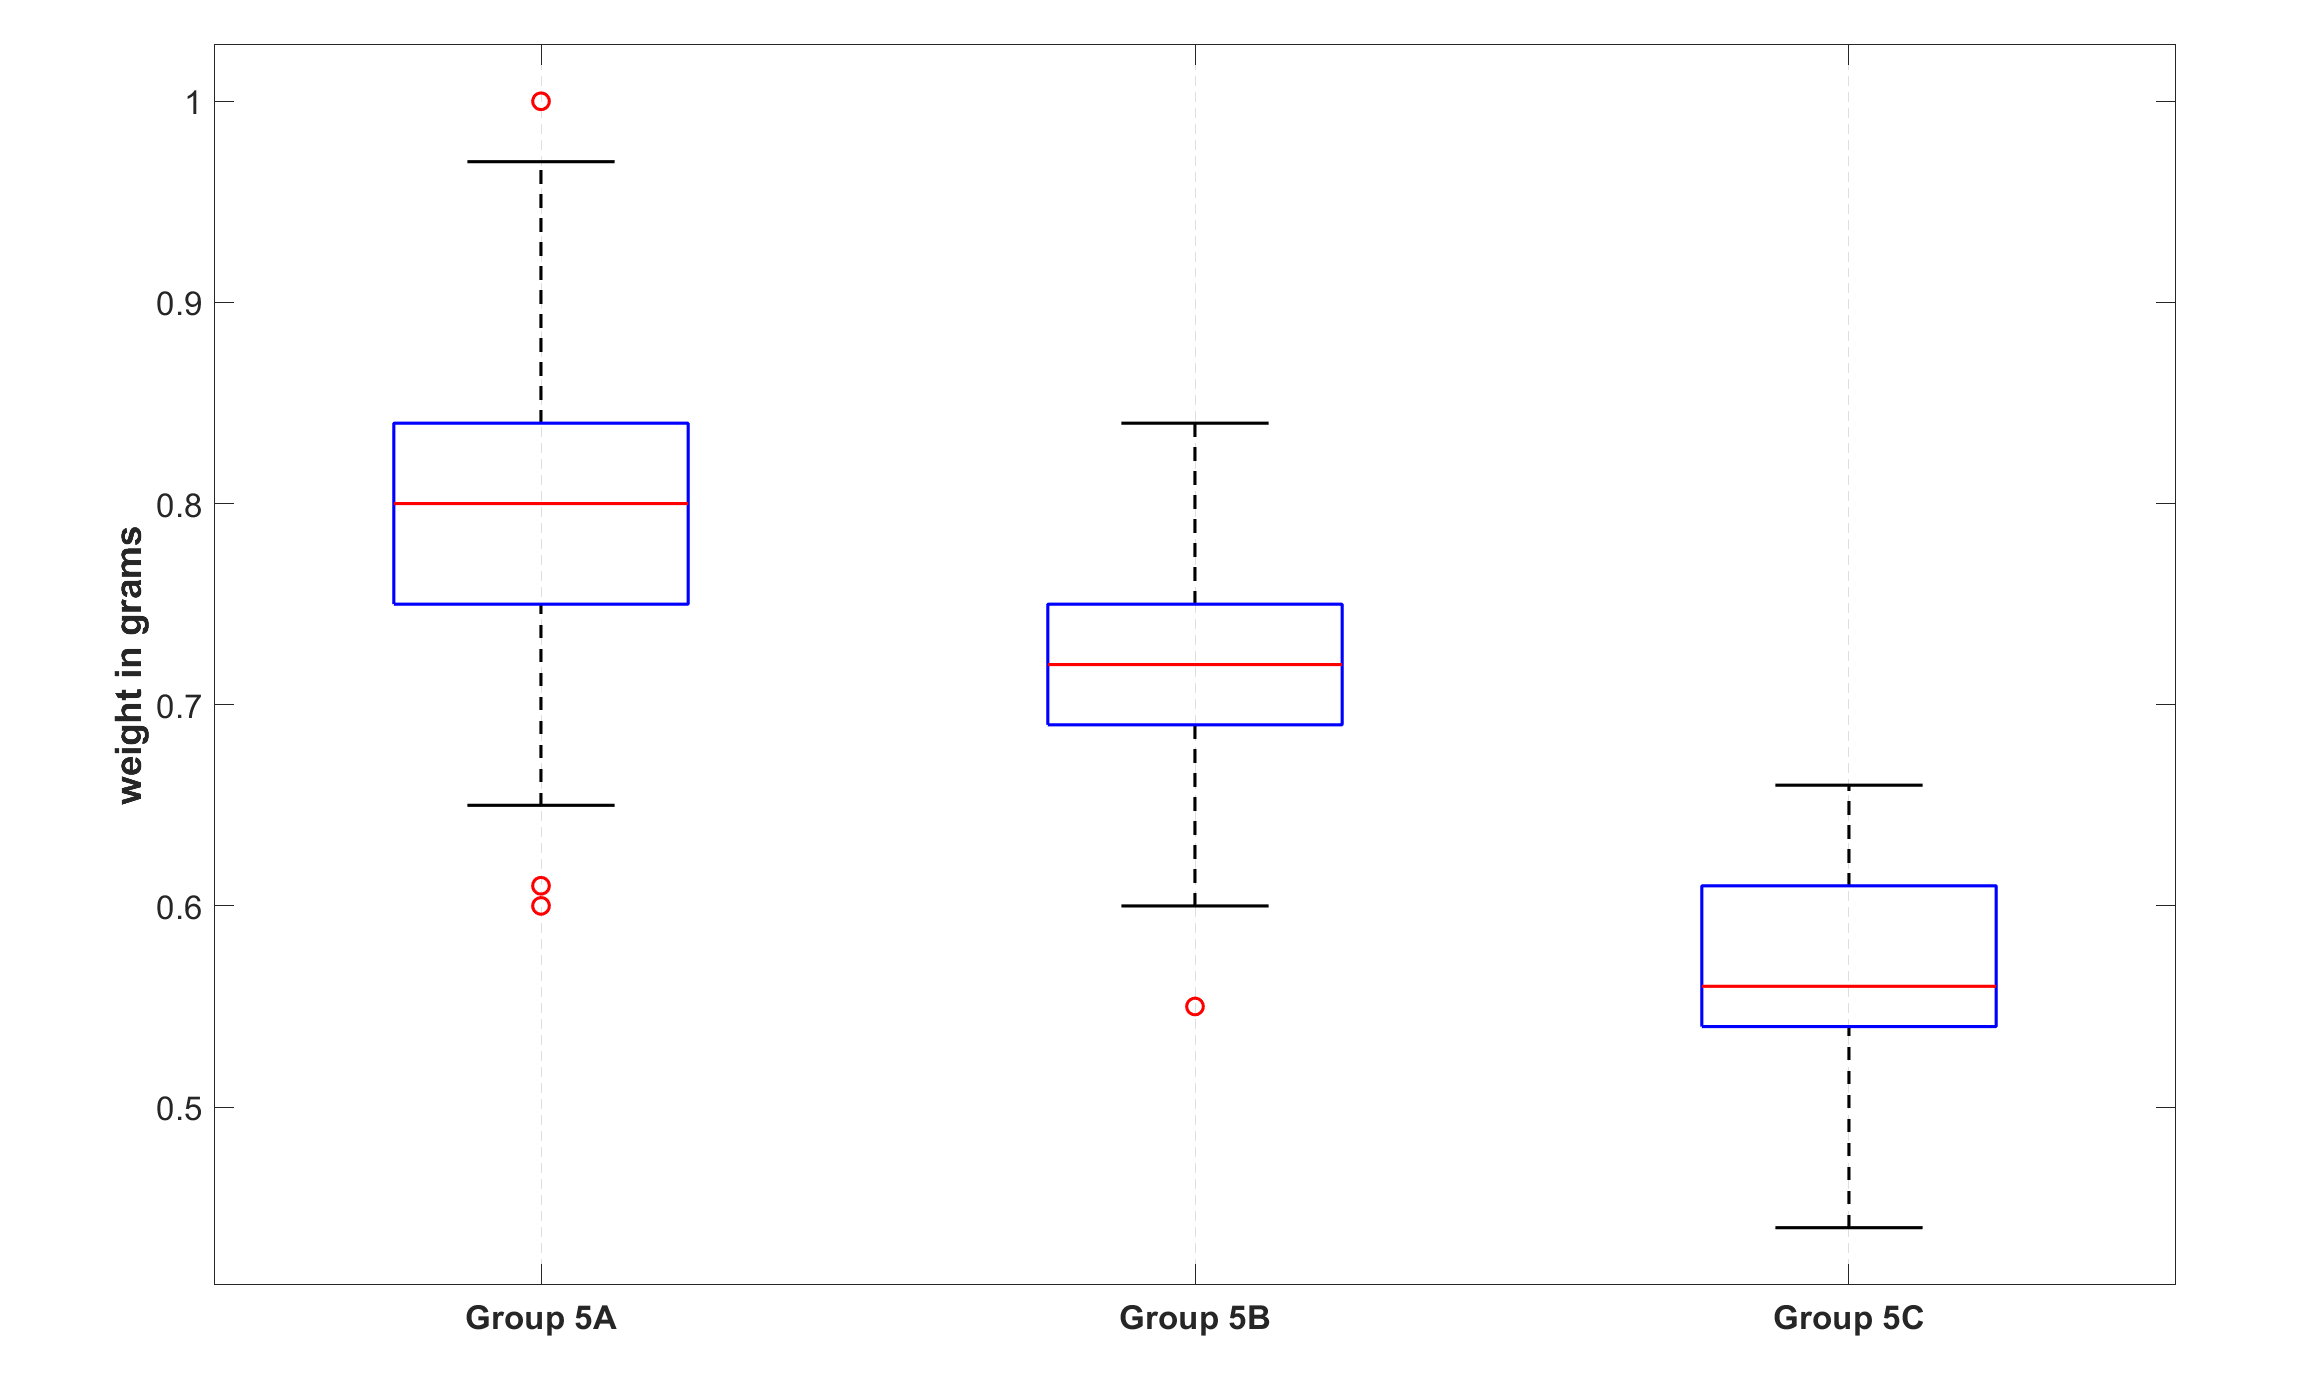 Figure 2: Box plots of groups 5A, 5B and 5C